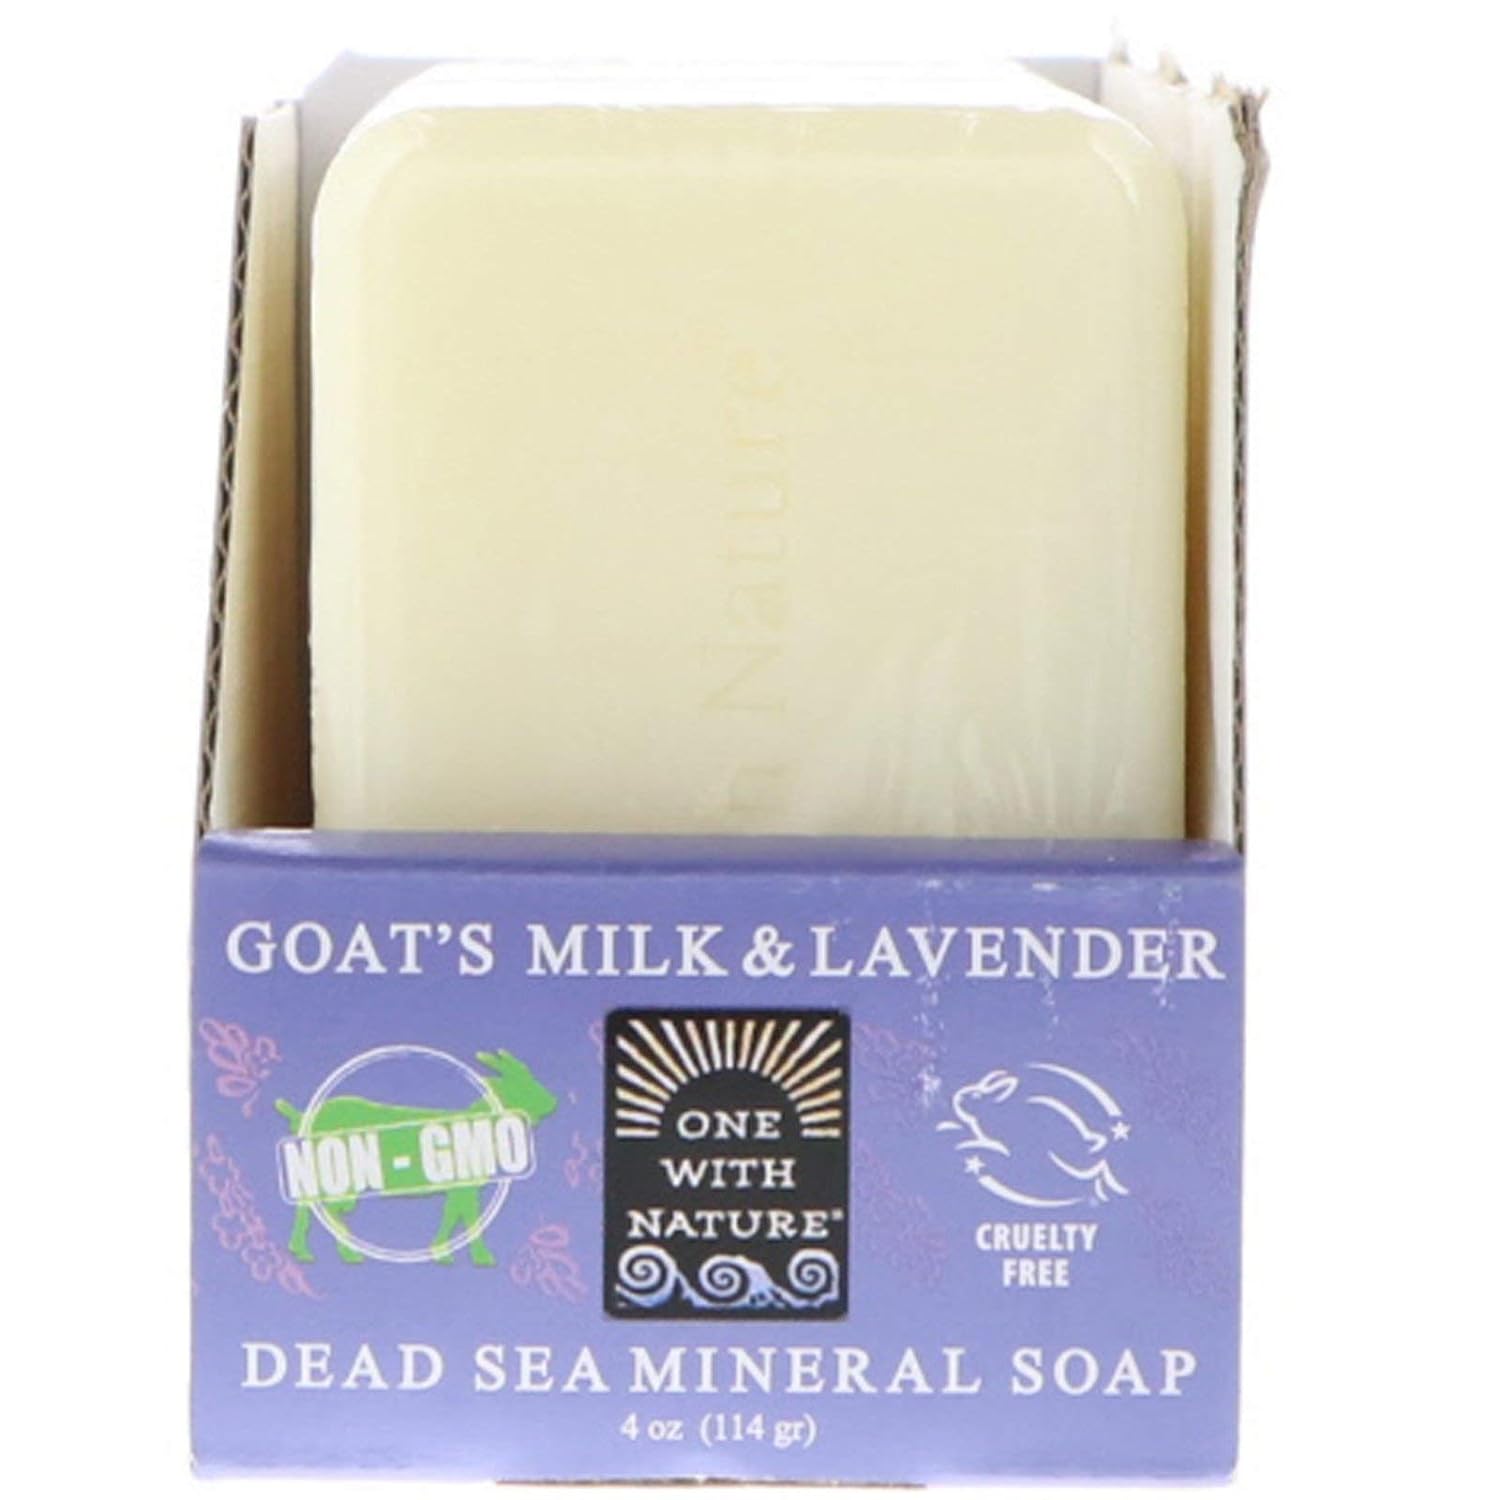 One with Nature Dead Sea Mineral Soap, Goat's Milk & Lavender, 6 Bars, 4  (114 g) Each